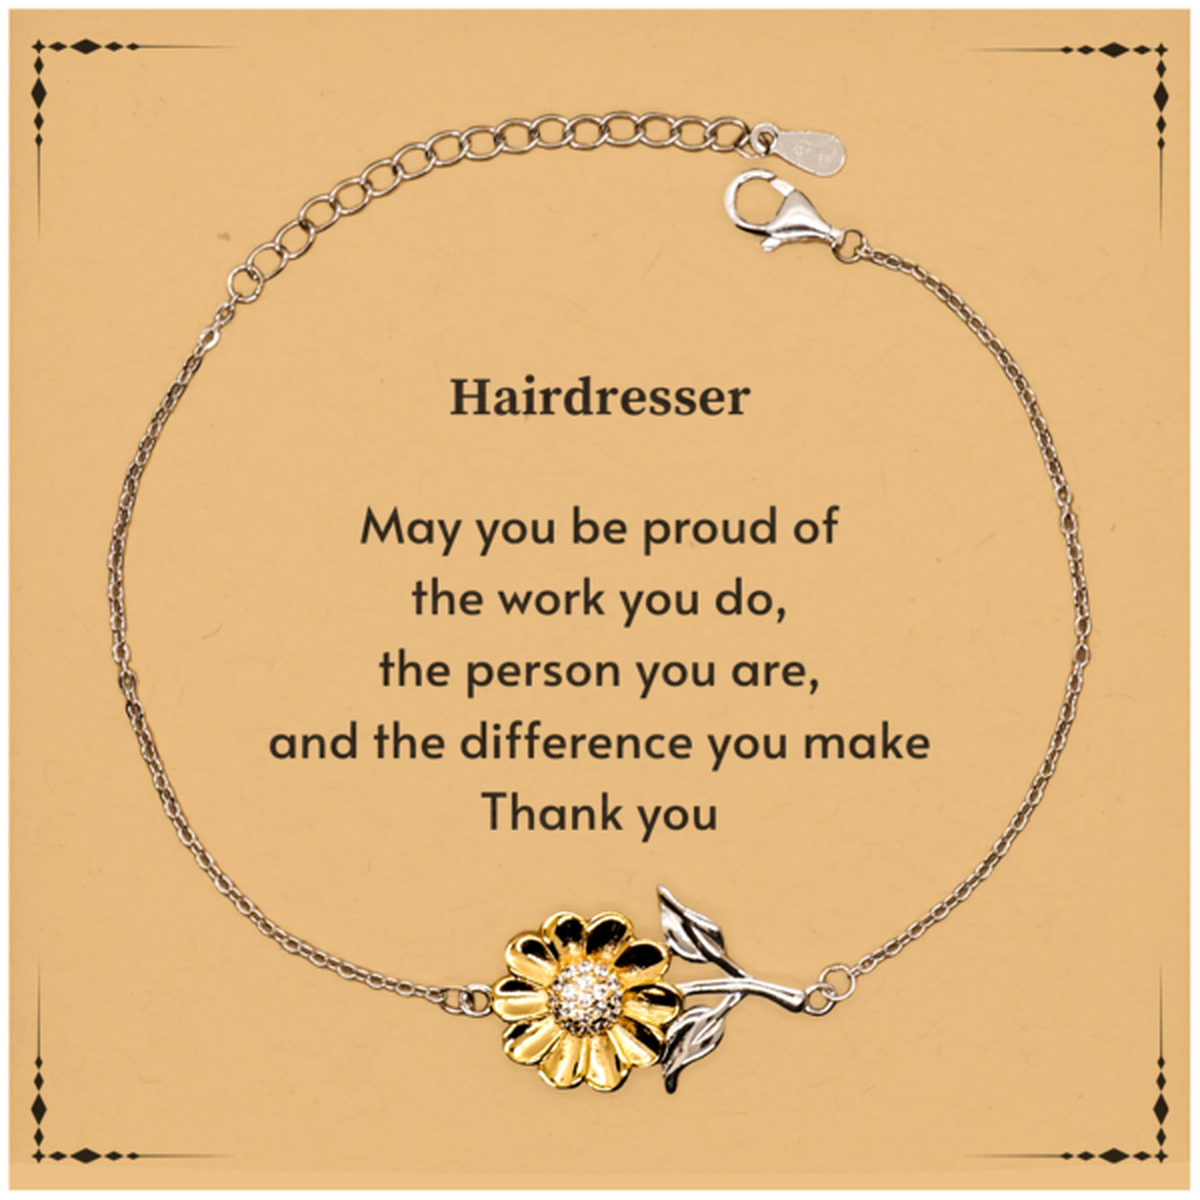 Heartwarming Sunflower Bracelet Retirement Coworkers Gifts for Hairdresser, Hairdresser May You be proud of the work you do, the person you are Gifts for Boss Men Women Friends